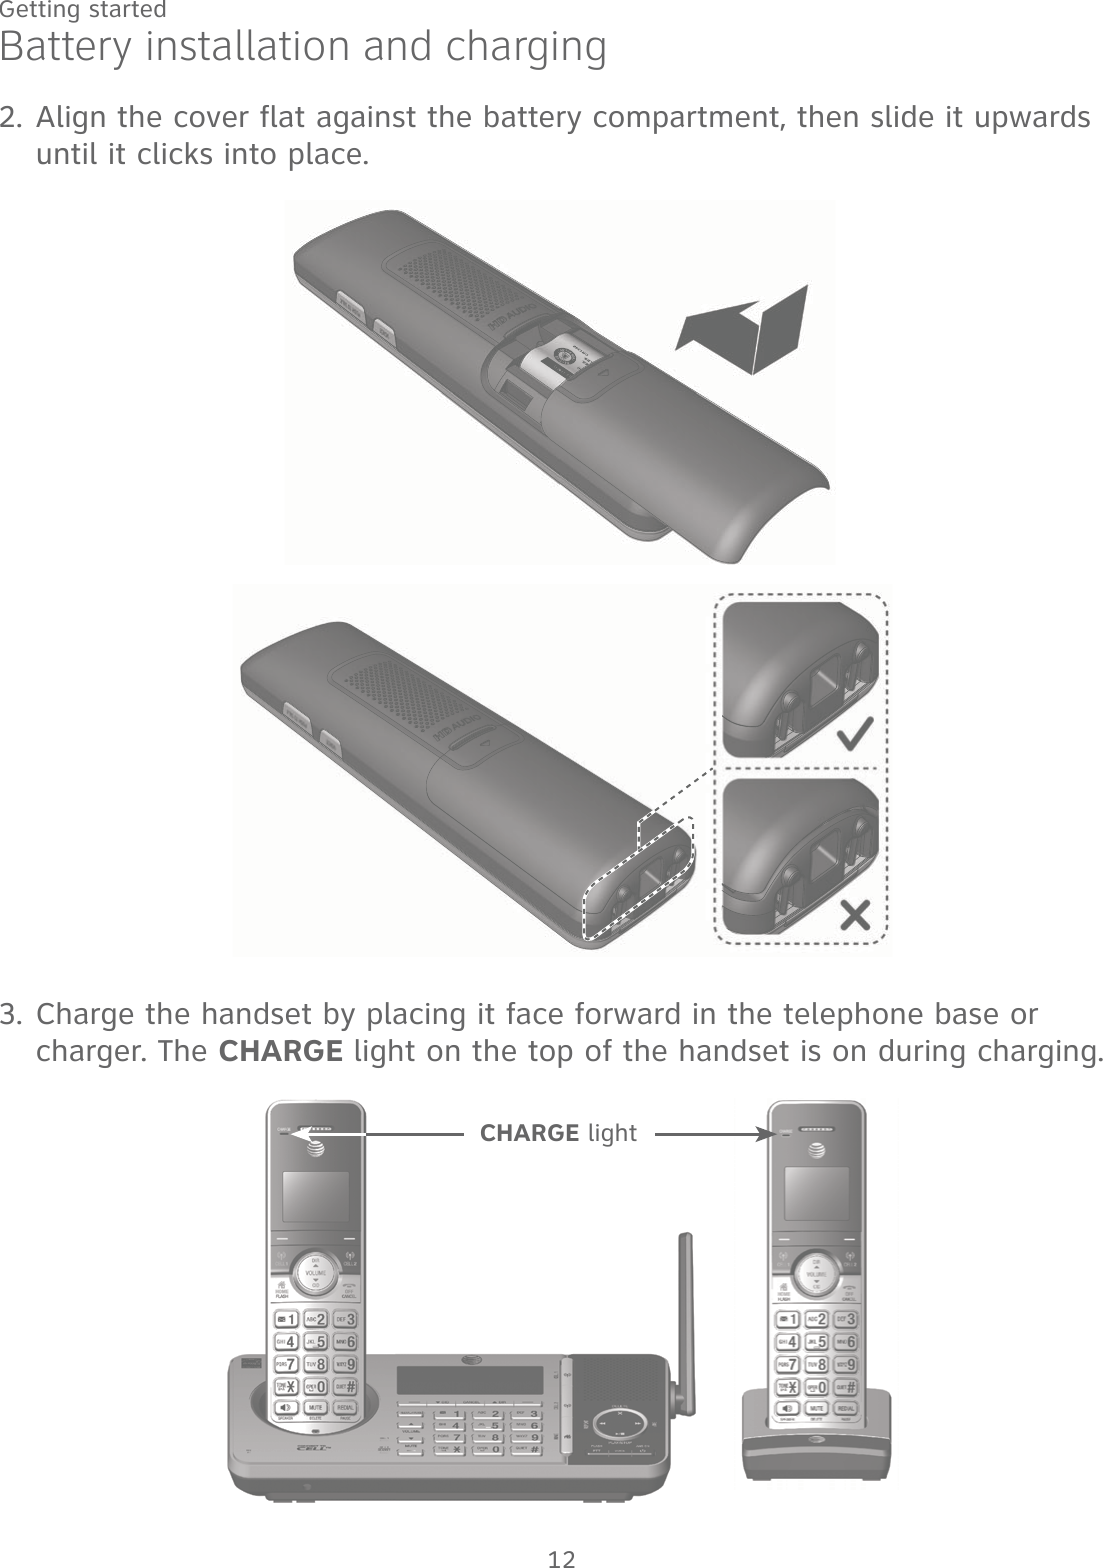 12Getting startedAlign the cover flat against the battery compartment, then slide it upwards until it clicks into place.2.Charge the handset by placing it face forward in the telephone base or charger. The CHARGE light on the top of the handset is on during charging.3.Battery installation and chargingCHARGE light